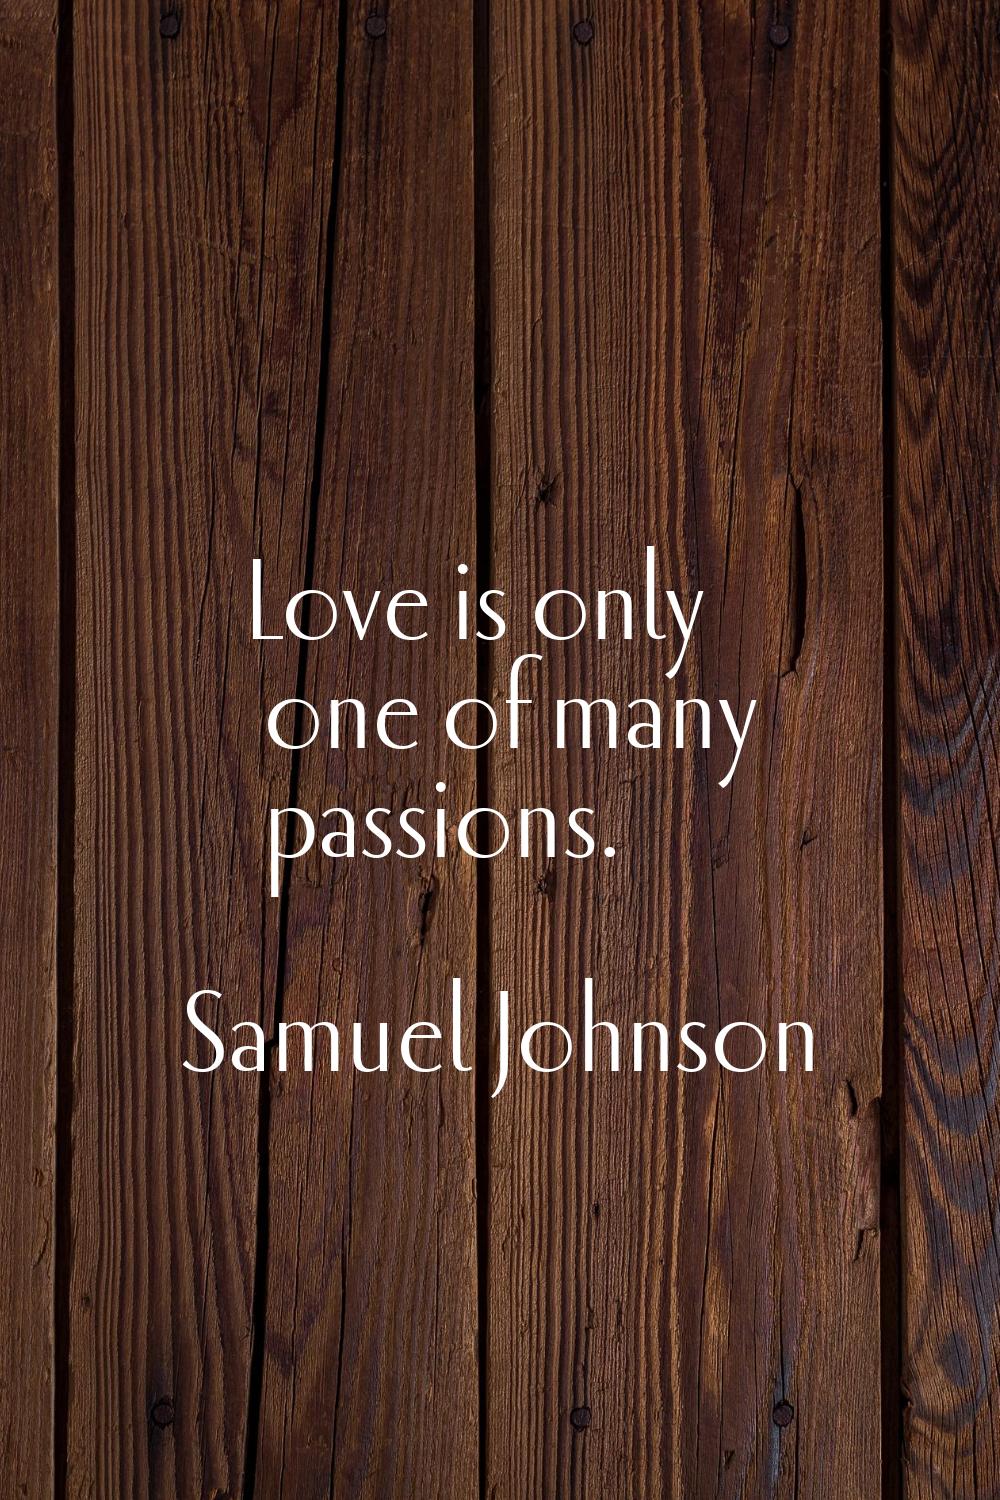 Love is only one of many passions.